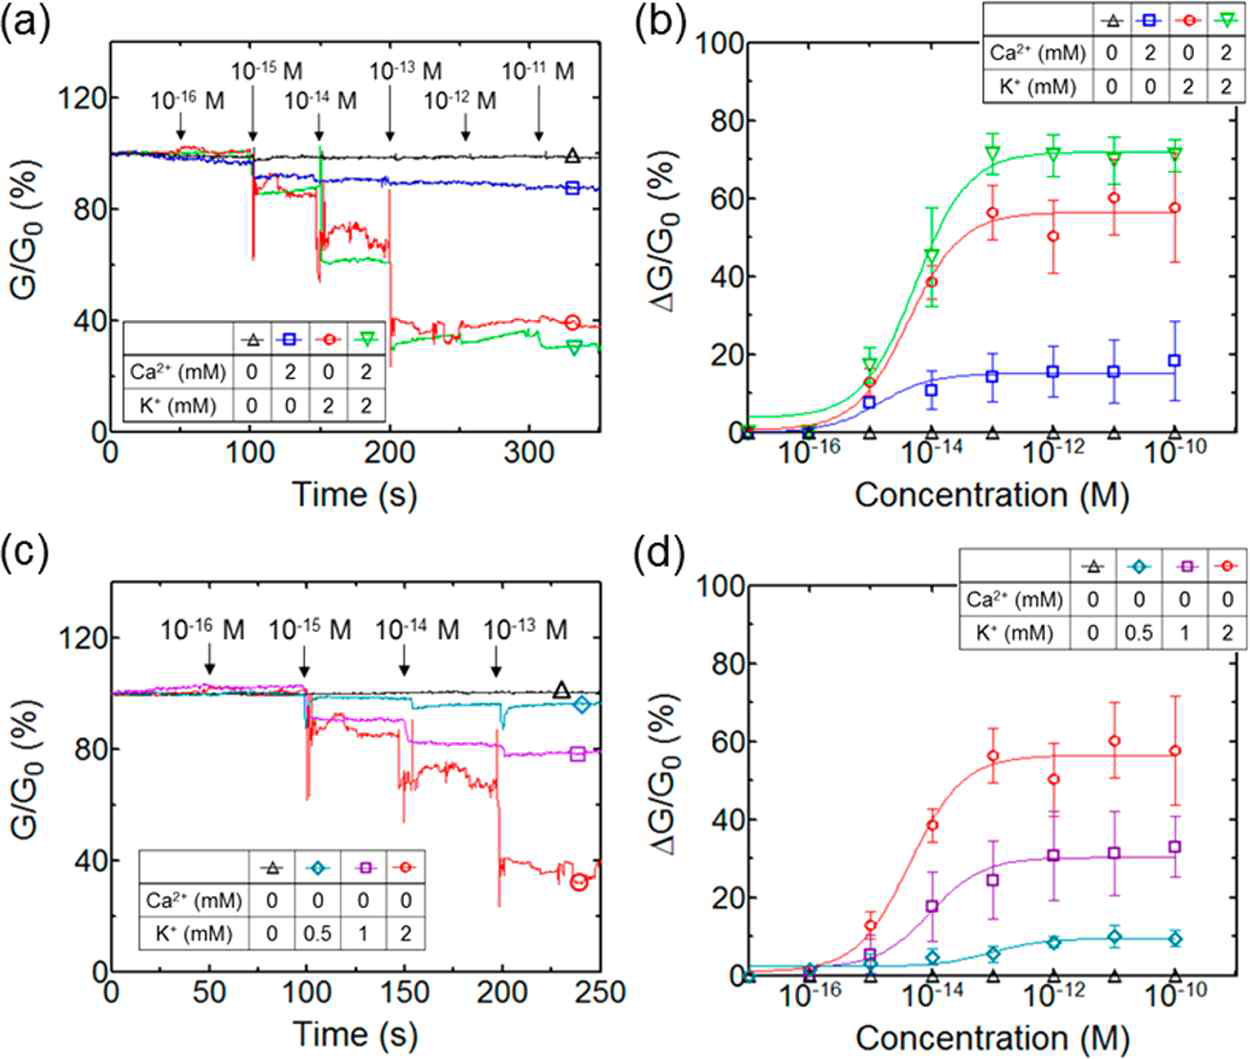 Real-time measurement of olfactory signals generated by nanovesicles carrying OR-Kir. (a) Real-time monitoring of conductance changes generated by injecting amyl butyrate. The responses were detected from 1015 M and saturated at 1013Mof amyl butyrate. (b) Dose-dependent response patterns to amyl butyrate. Each data point and error bar indicates the mean and standard deviation (SD) values, respecively (n = 5). Conductance changes generated by potassium influx were much larger than those generated by calcium influx. (c) Real-time monitoring of conductance changes in buffer solutions with different concentrations of potassiumions. (d) Effert of external Kb concentrations on response intensity. Each data point and error bar indicates the mean and SD values, respectively (n = 5). Note that when higher concentrations of potassiumions were in the buffer solution, greater conductance changes occurred